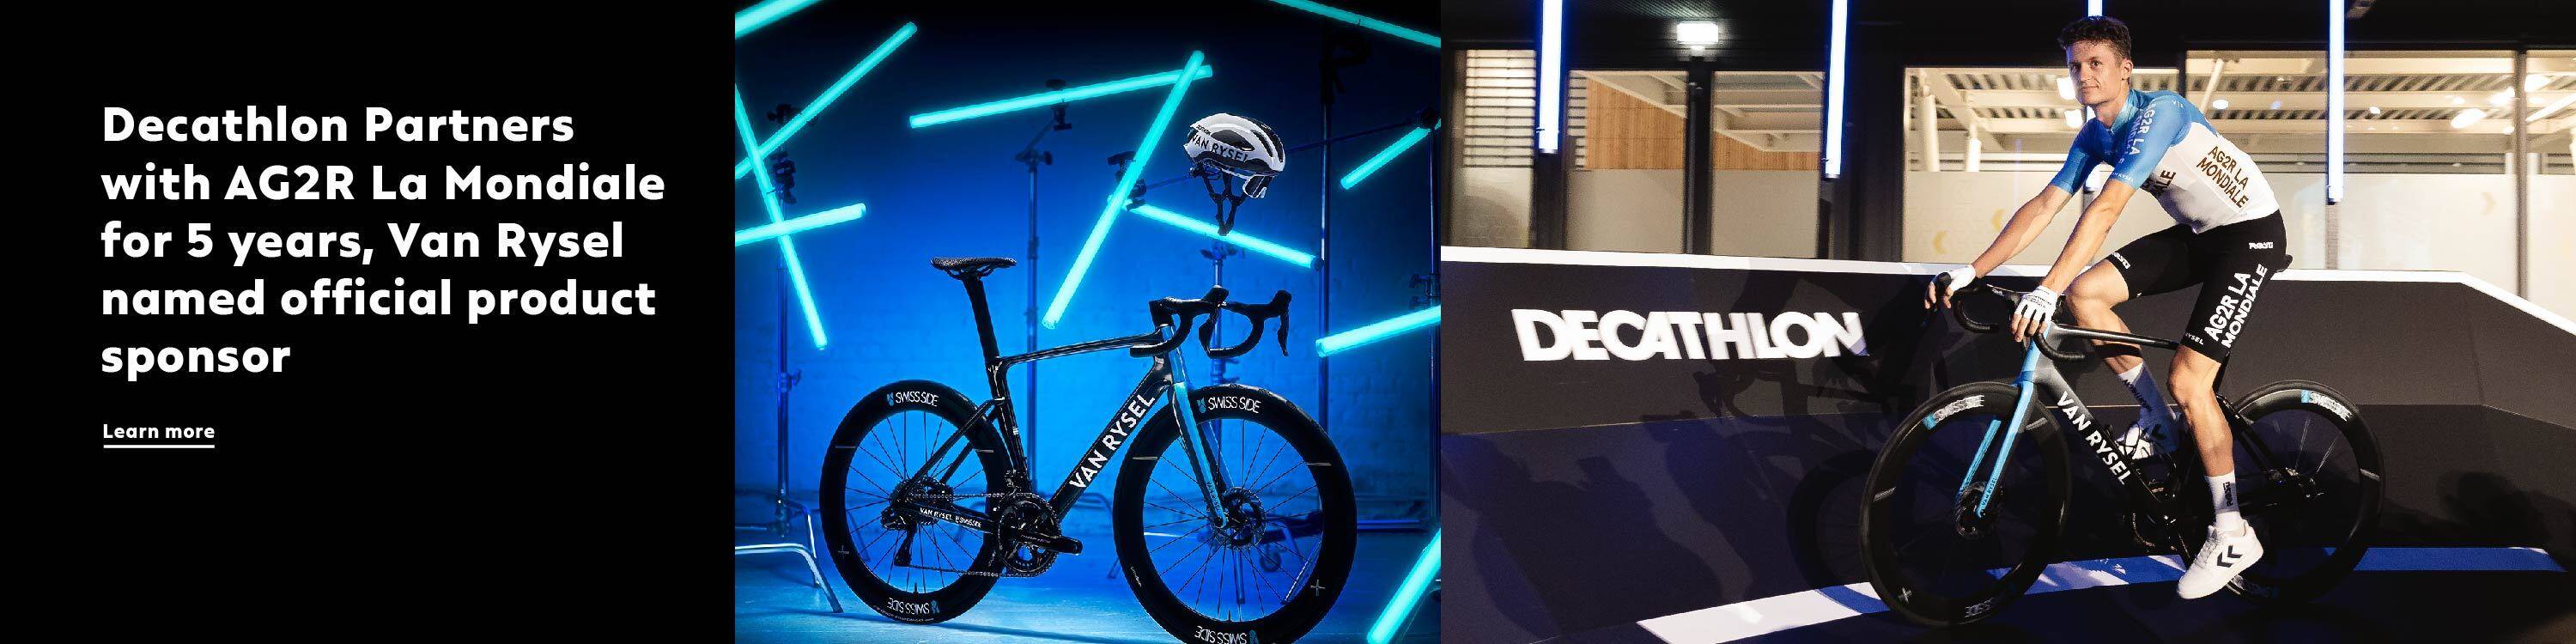 Decathlon Partners with AG2R La Mondiale for 5 years, Van Rysel named official product sponsor. Learn More.